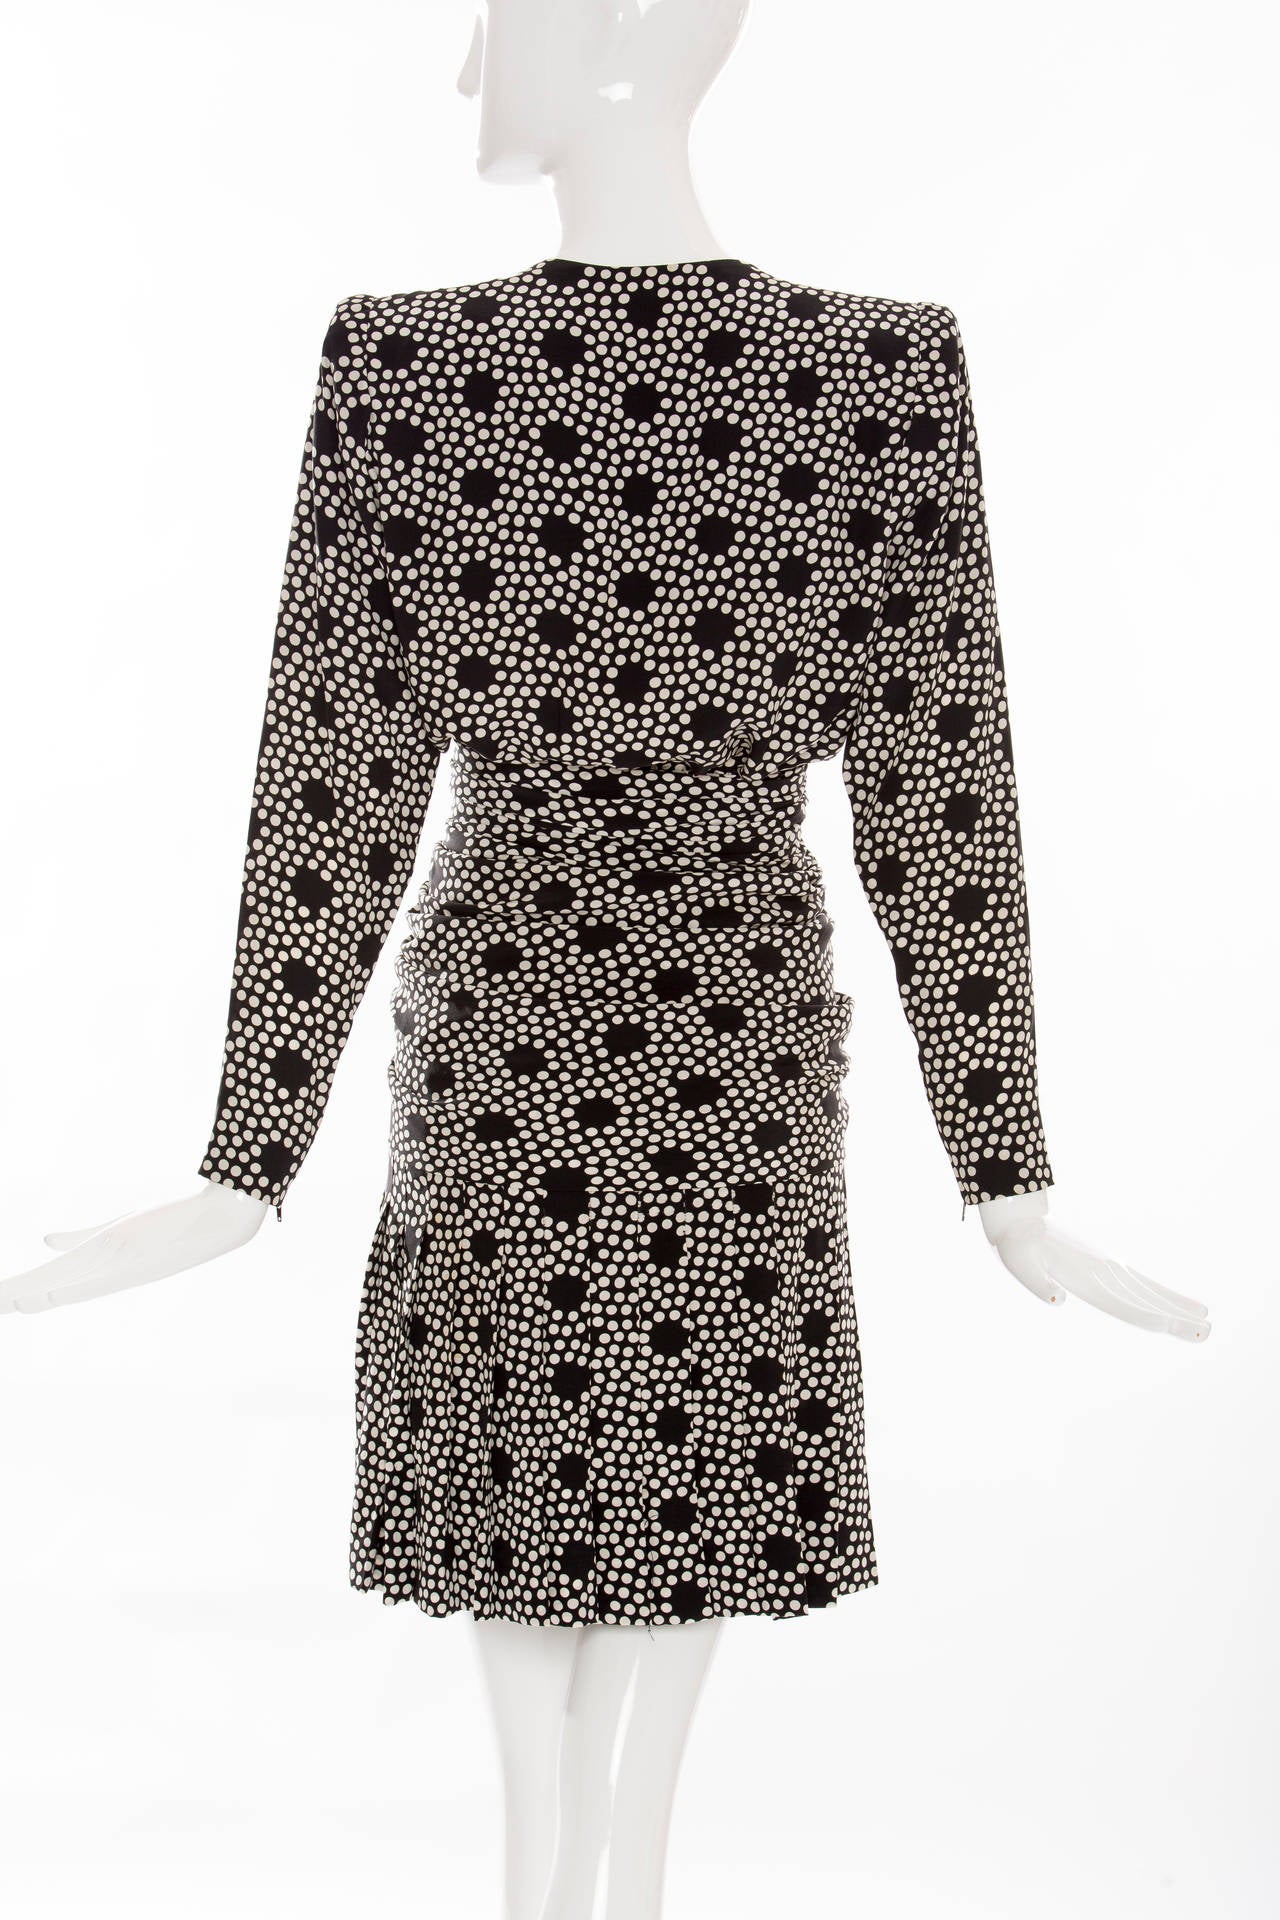 Women's Givenchy Haute Couture Skirt Suit, Circa 1980s